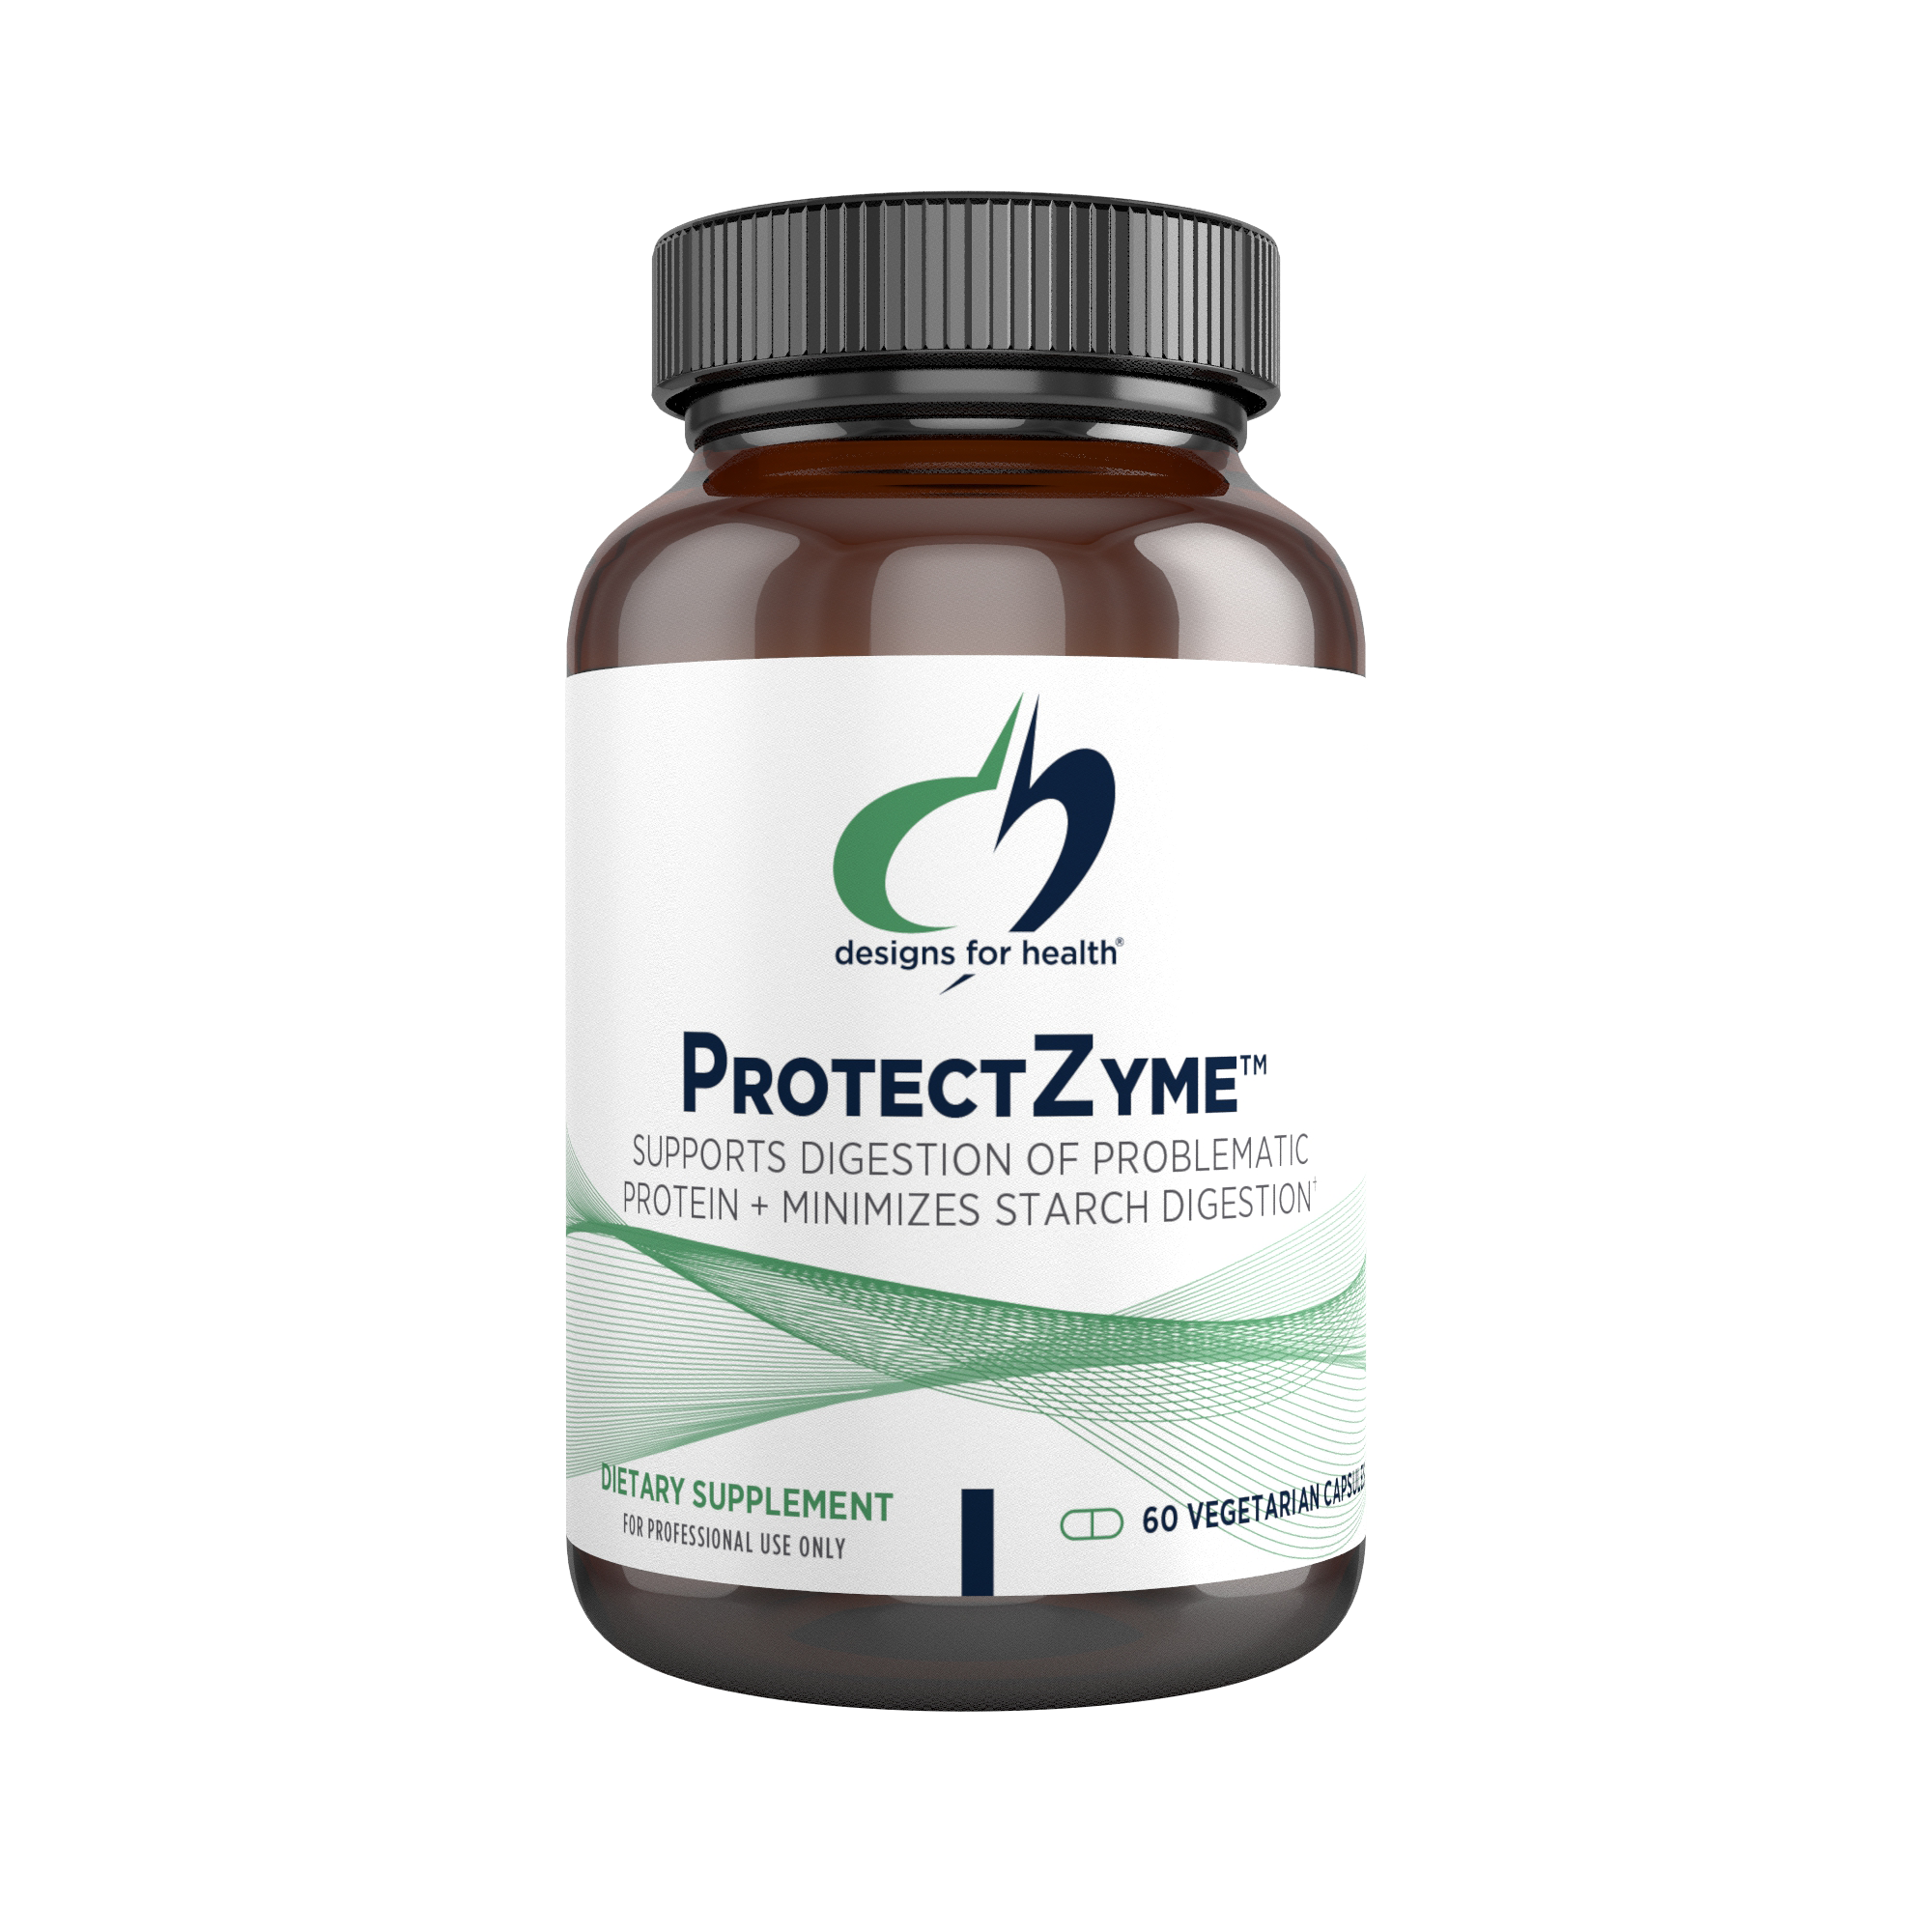 ProtectZyme™